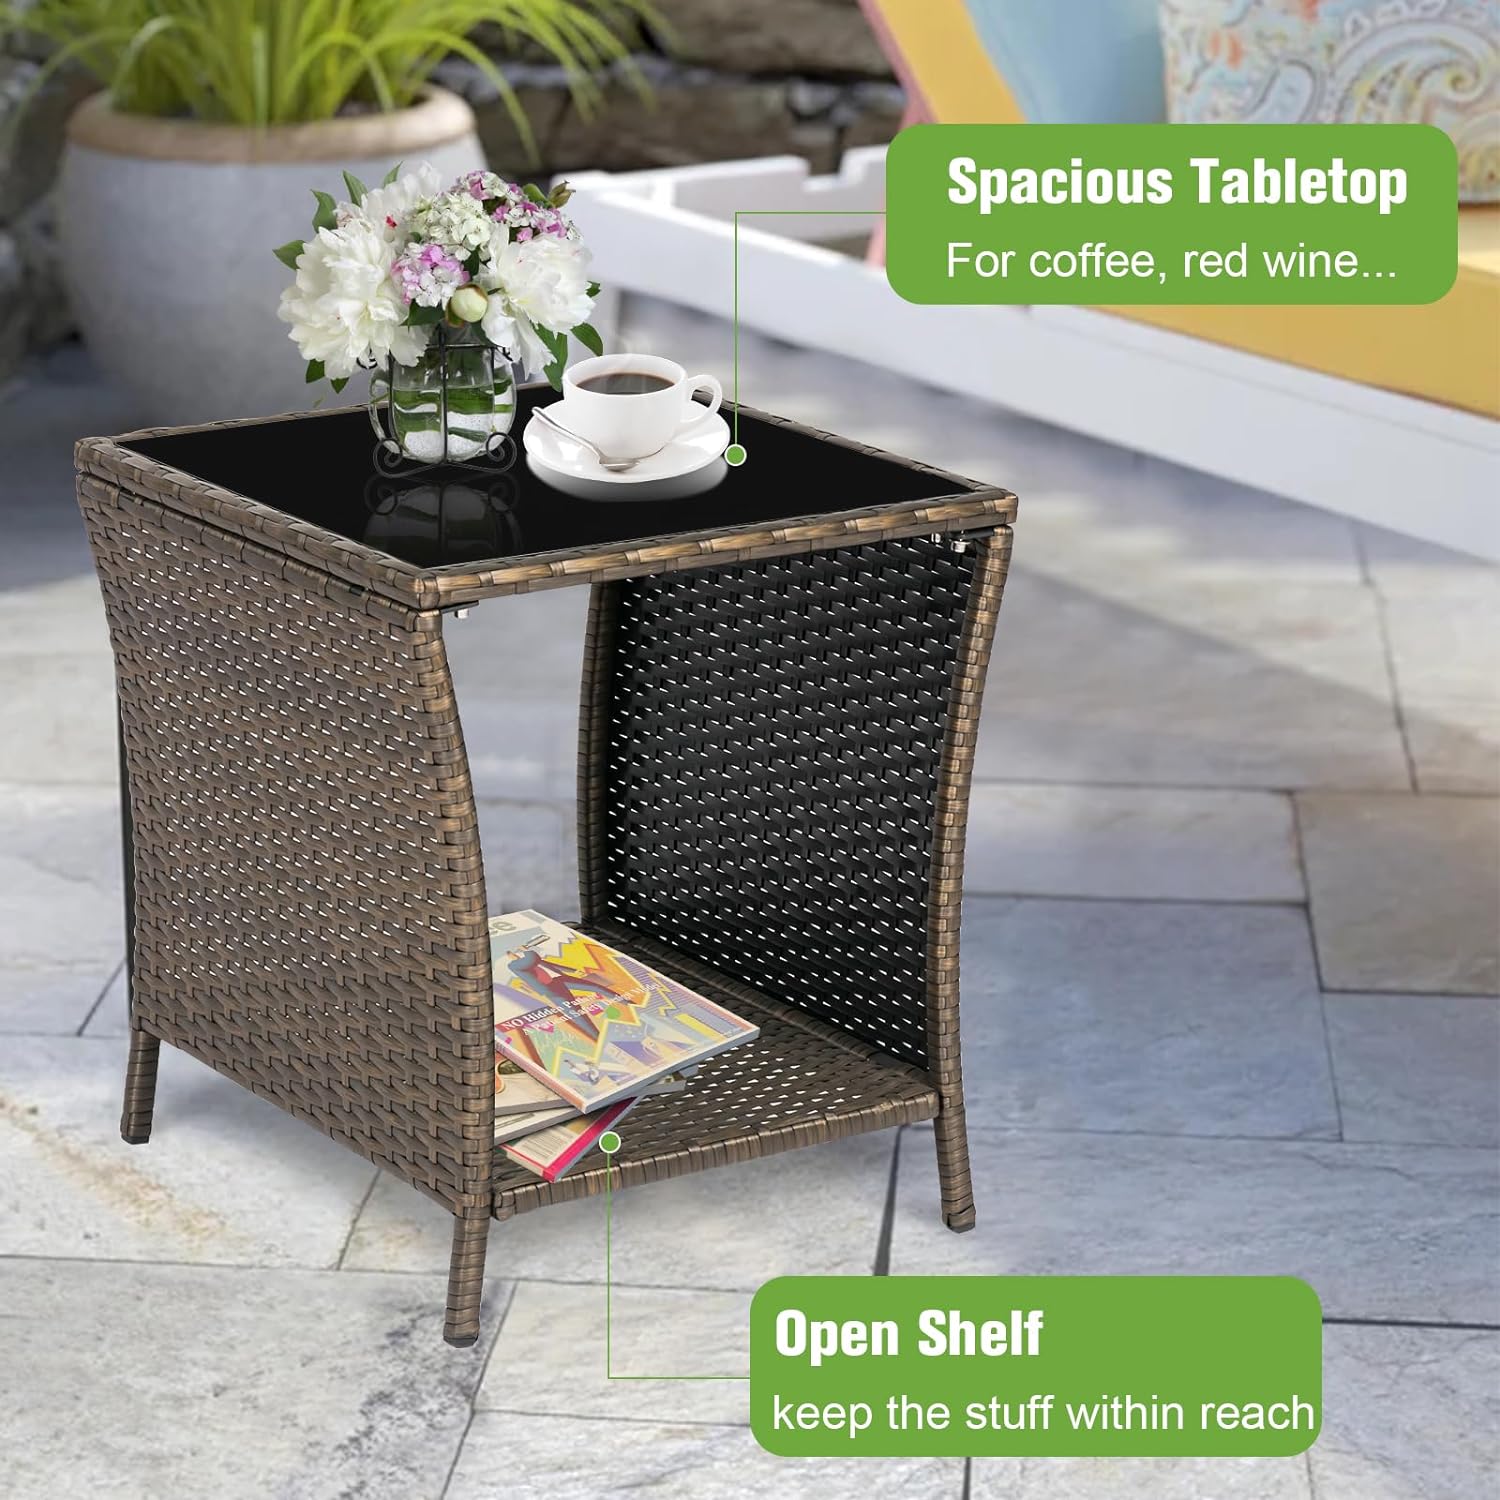 Kinbor Patio Wicker Rattan Side Table Outdoor Square Tempered Glass Top with Storage, Brown - image 4 of 8